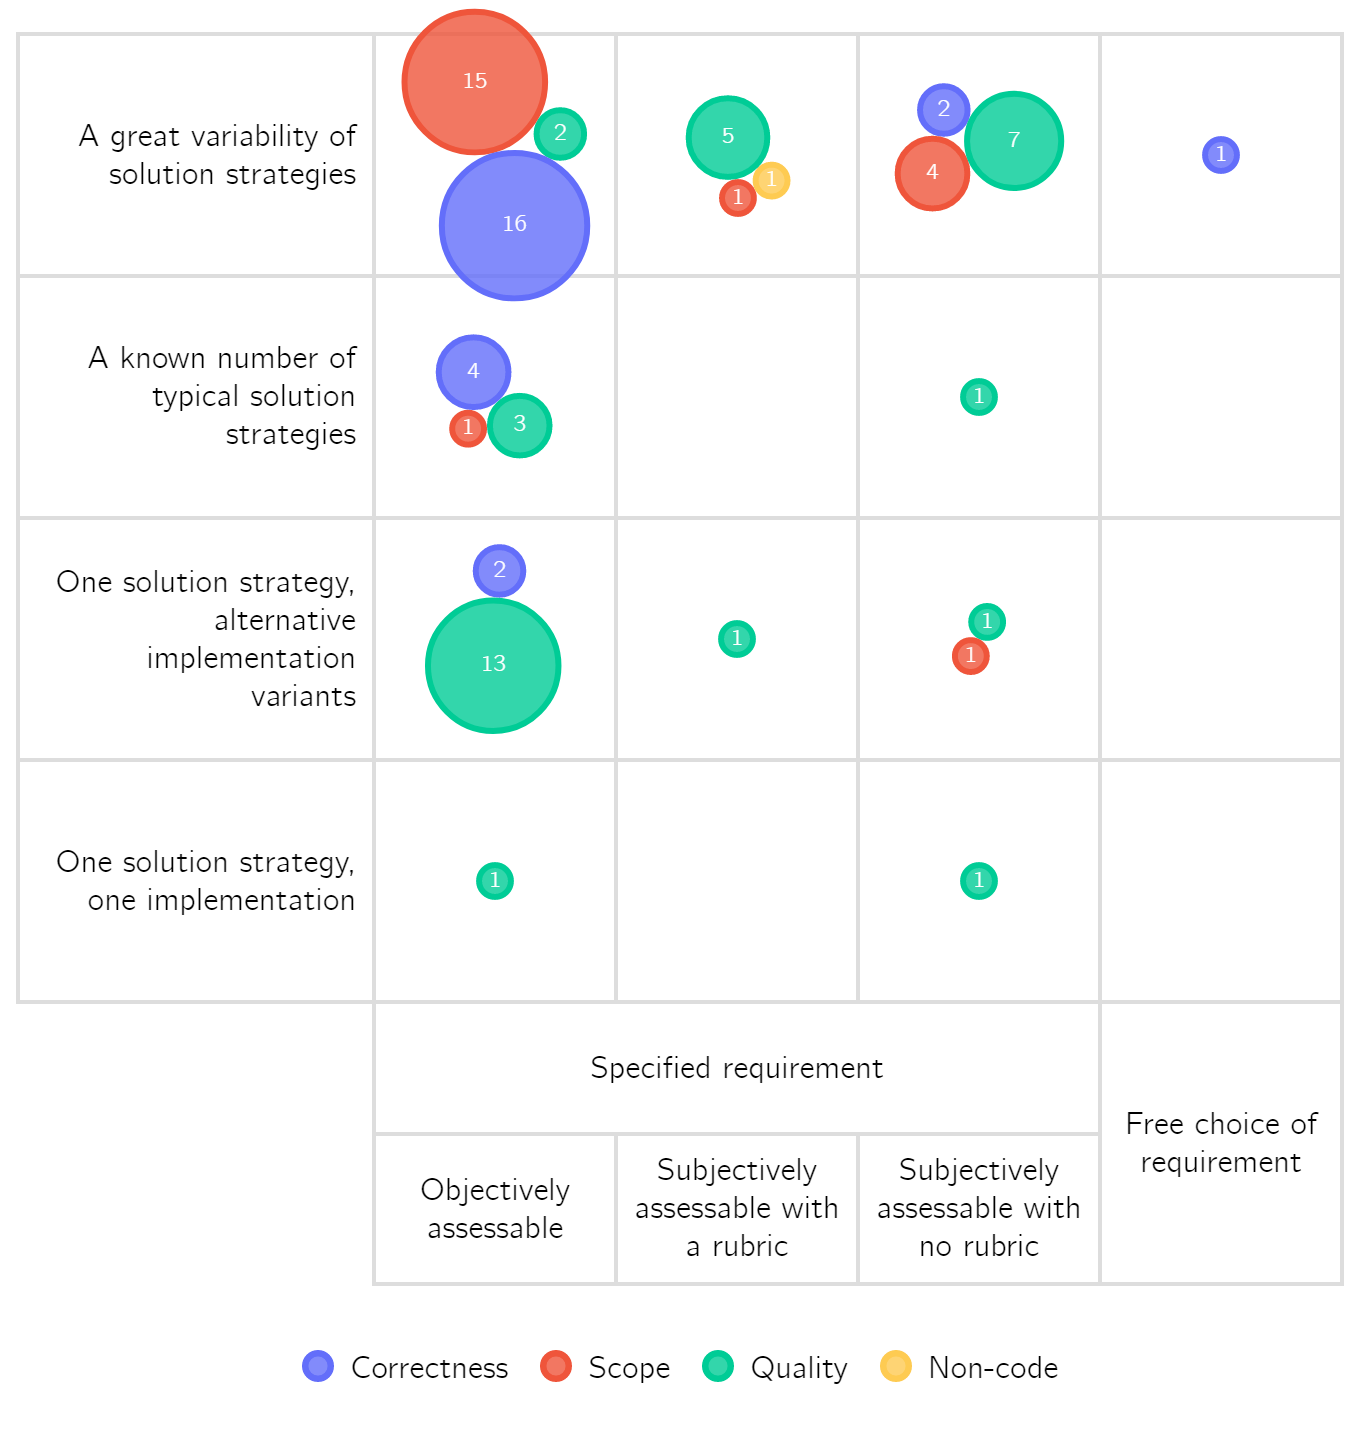 A four by four grid filled with coloured bubbles. On the vertical axis, there are four categories. From the bottom up: one solution strategy, one implementation; one solution strategy, alternative implementation variants; a known number of typical strategies; and a great variability of solution strategies. On the horizontal axis, there are two primary categories: a specified requirement or a free choice requirement. For a specified requirement, there are three subcategories: objectively assessable, subjectively assessable with a rubric, and subjectively assessable with no rubric. Most criteria are concentrated in the upper left corner, spread along the edges for three cells. The colours represent four categories: correctness, scope, quality, and non-code.